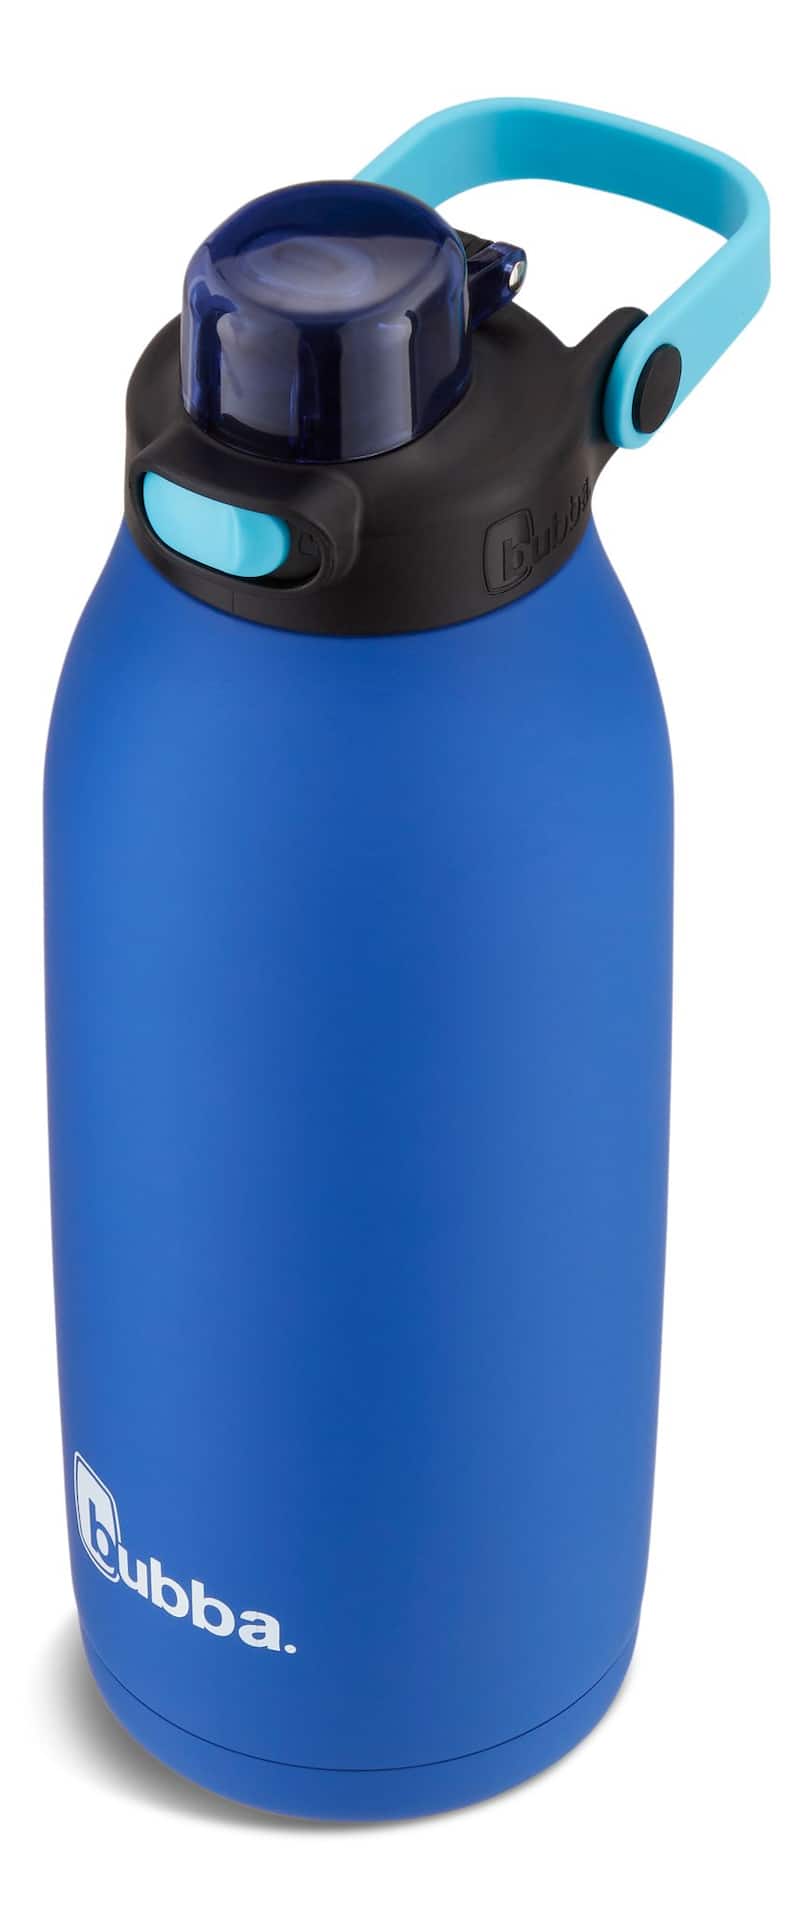 bubba 40oz Radiant Push Button Water Bottle with Straw Rubberized